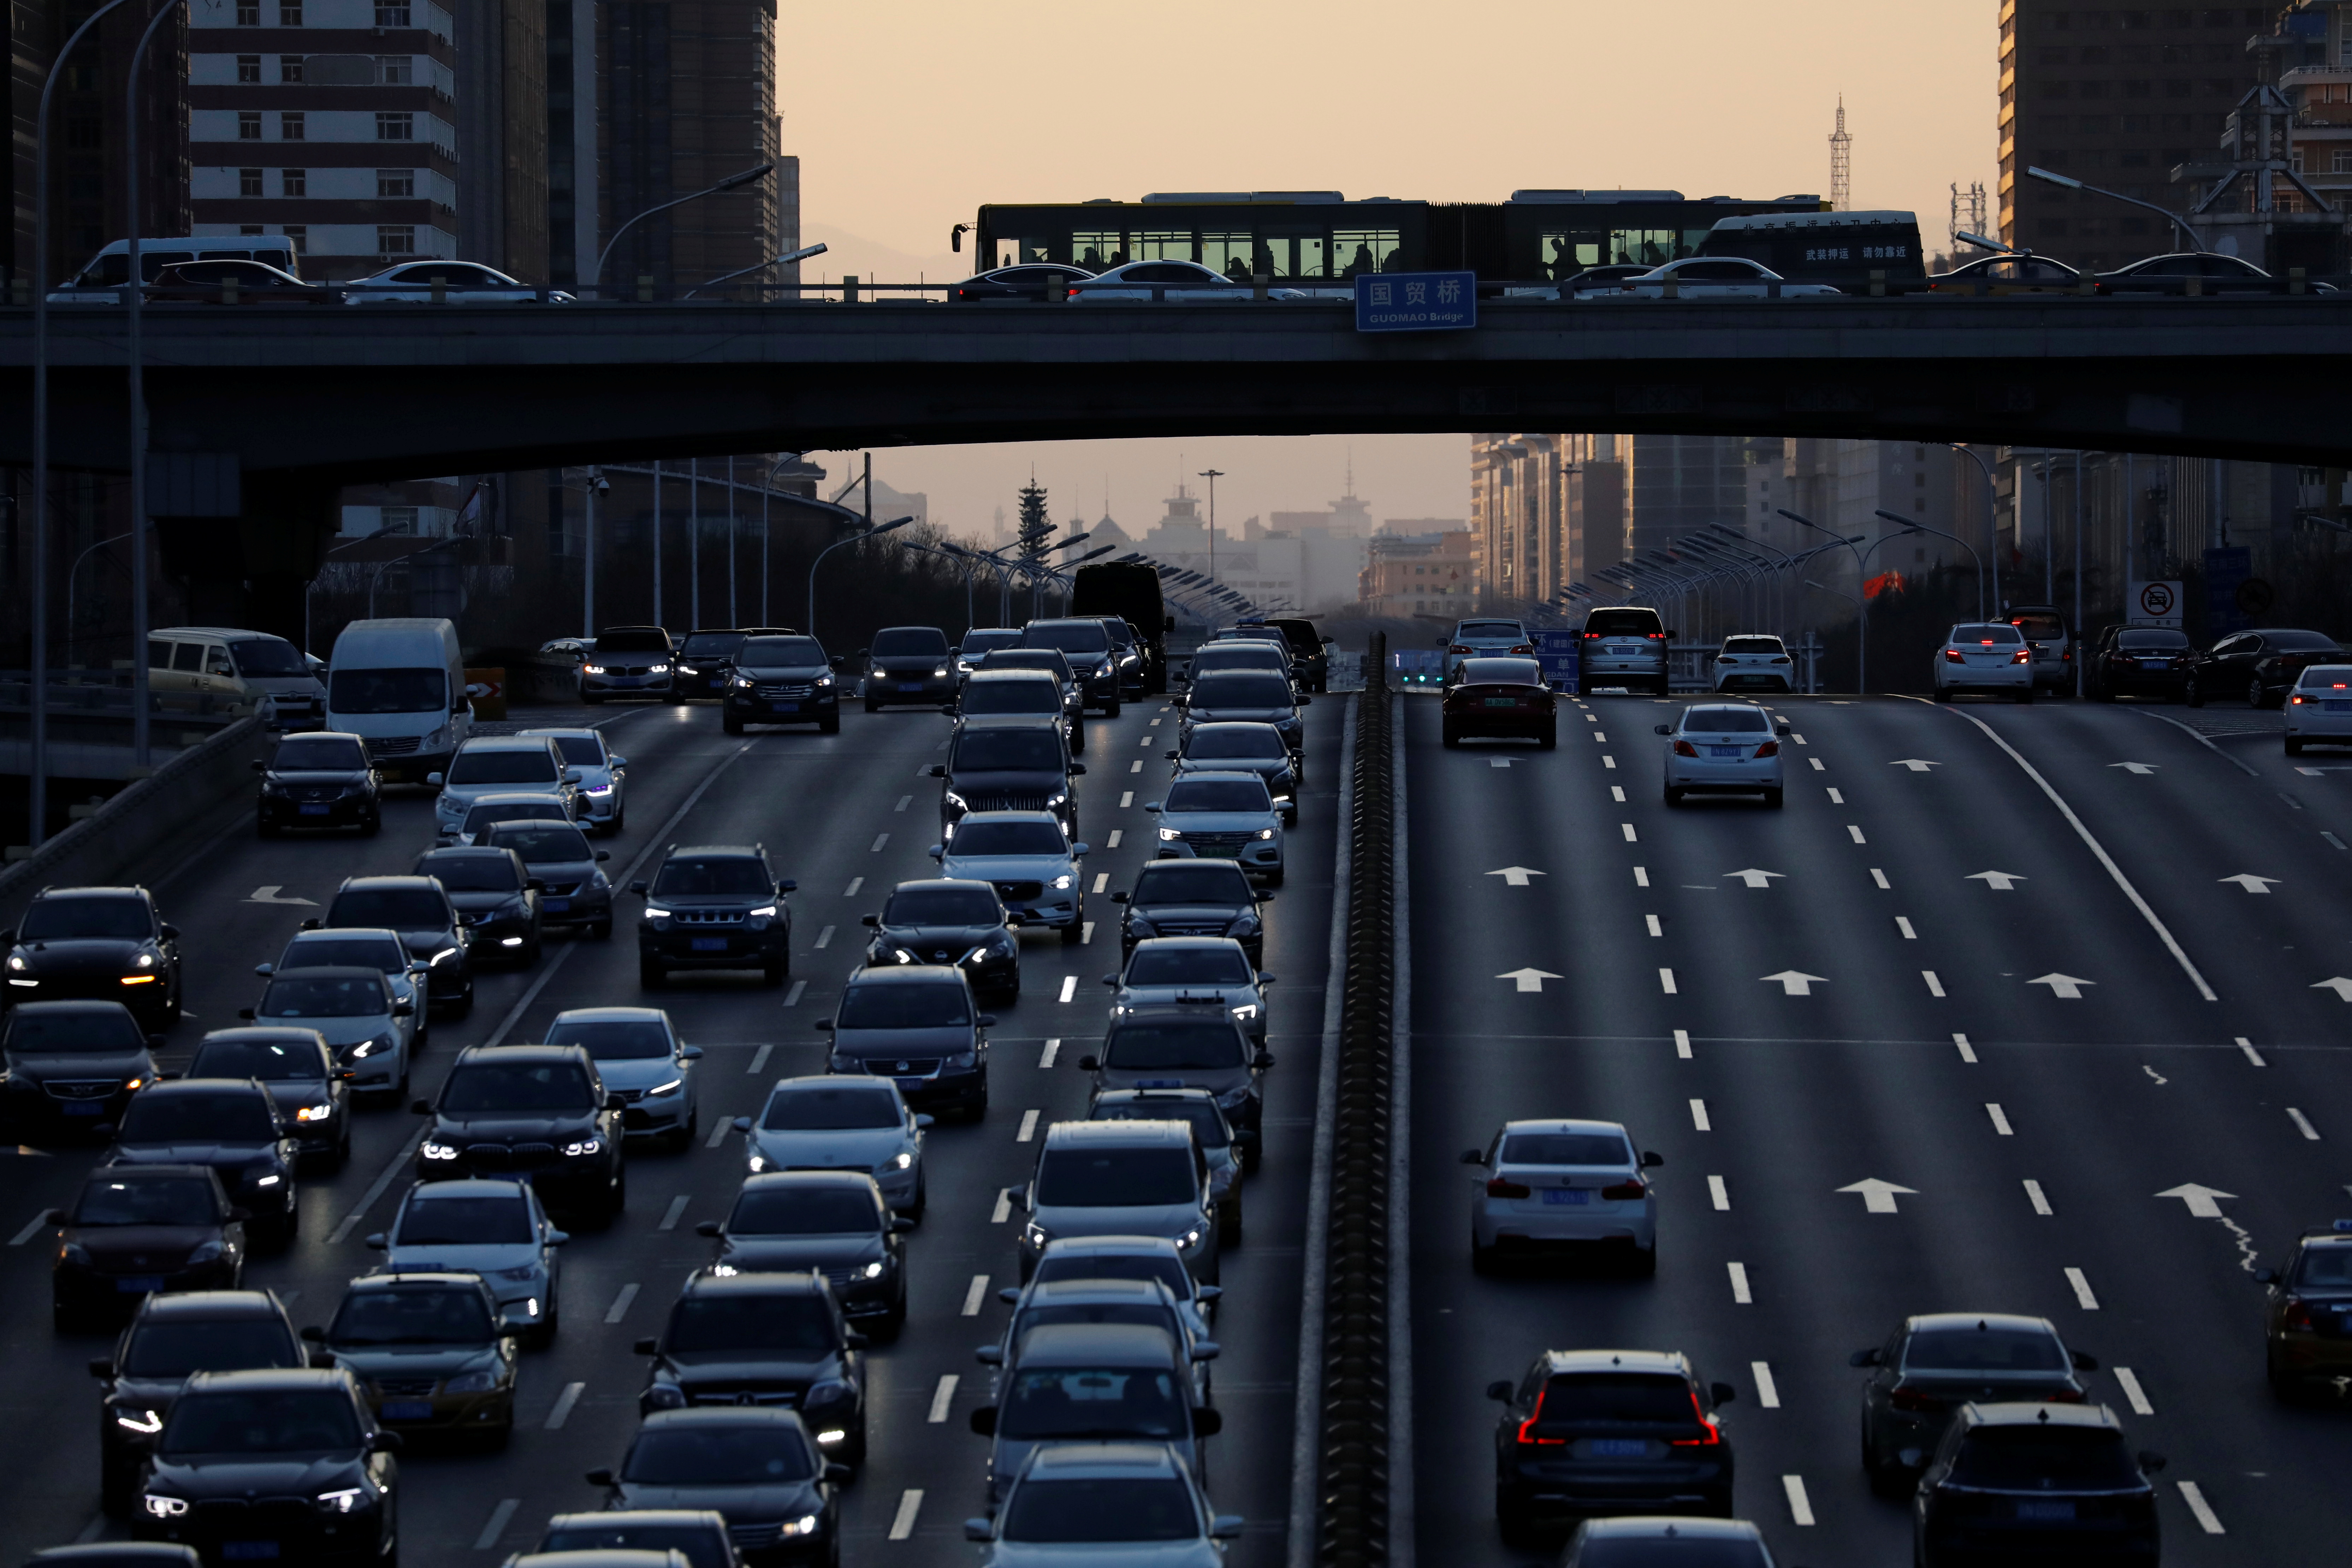 General view shows the traffic during the evening rush hour in Beijing